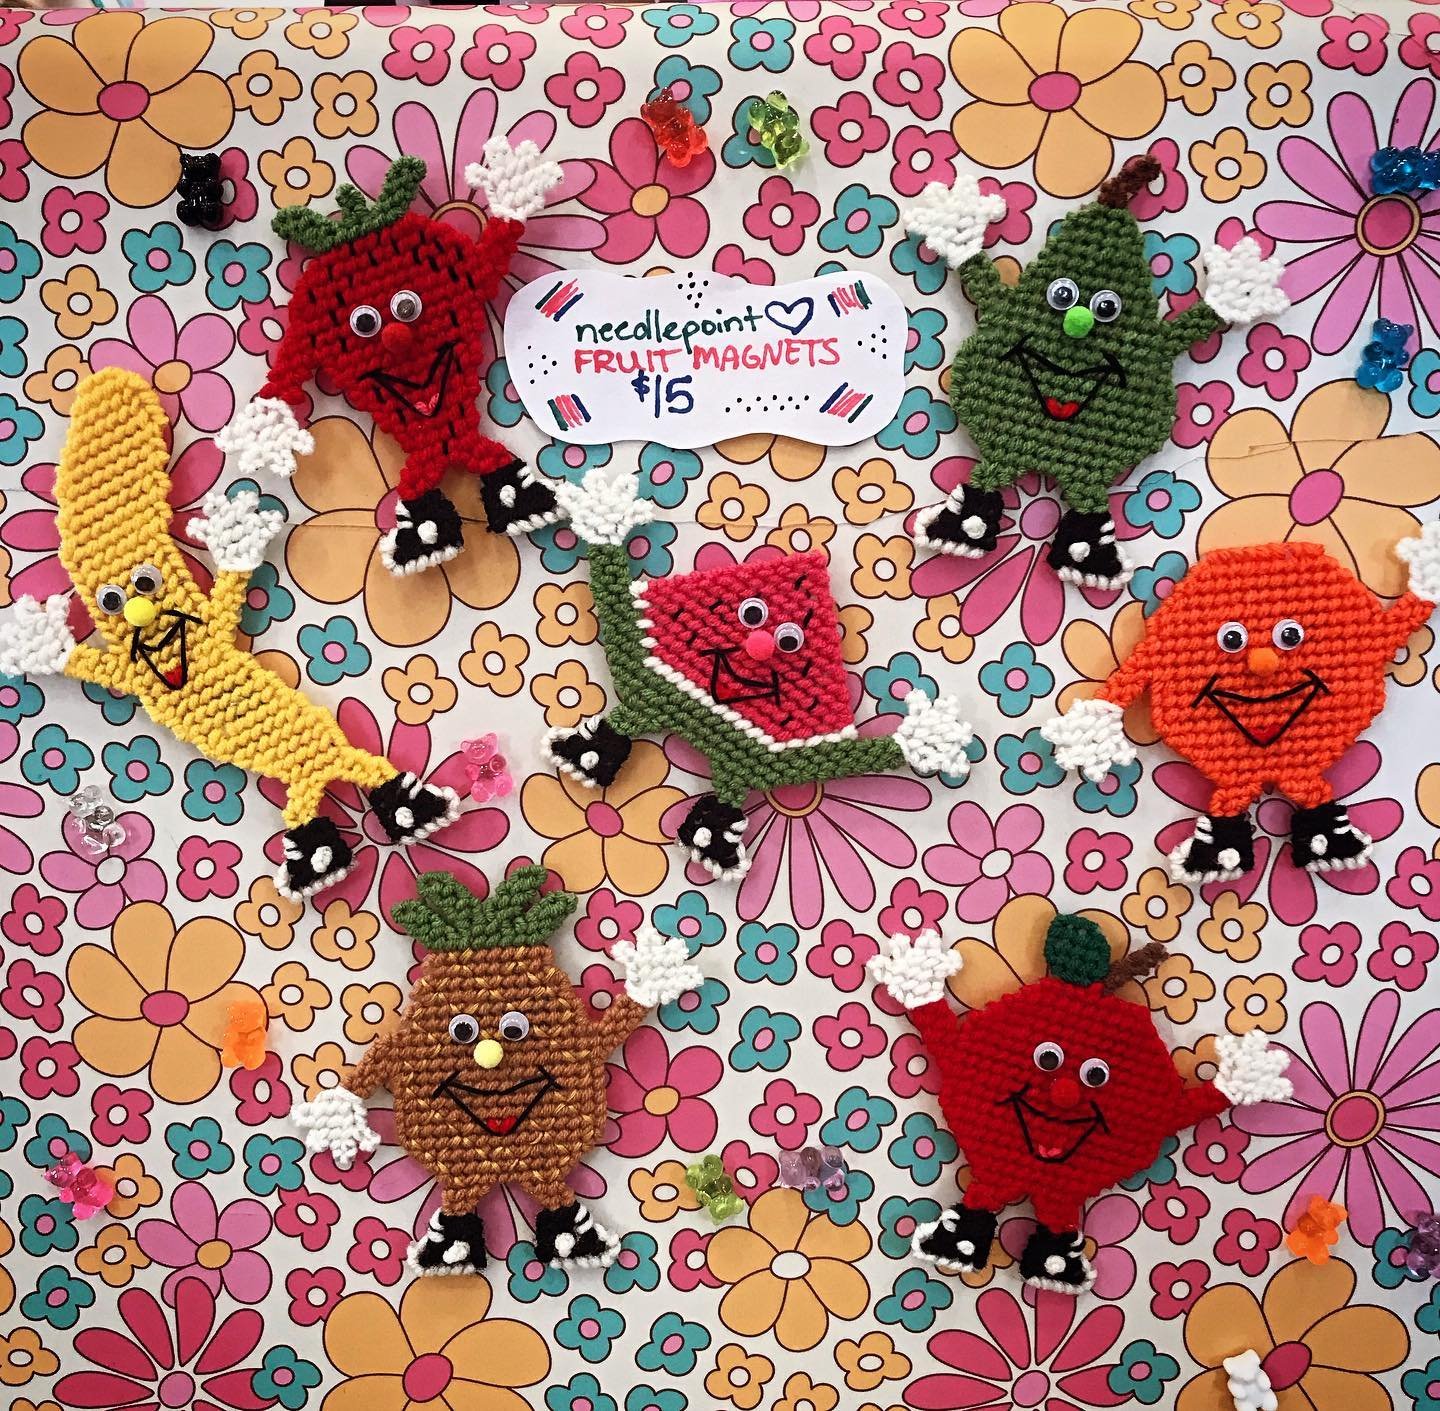 We&rsquo;ve got needlepoint fruit magnets made by our very own Meagan aka @sketchy_stitch ! They&rsquo;re cheerful, charming, and ready to lay down some dance moves.